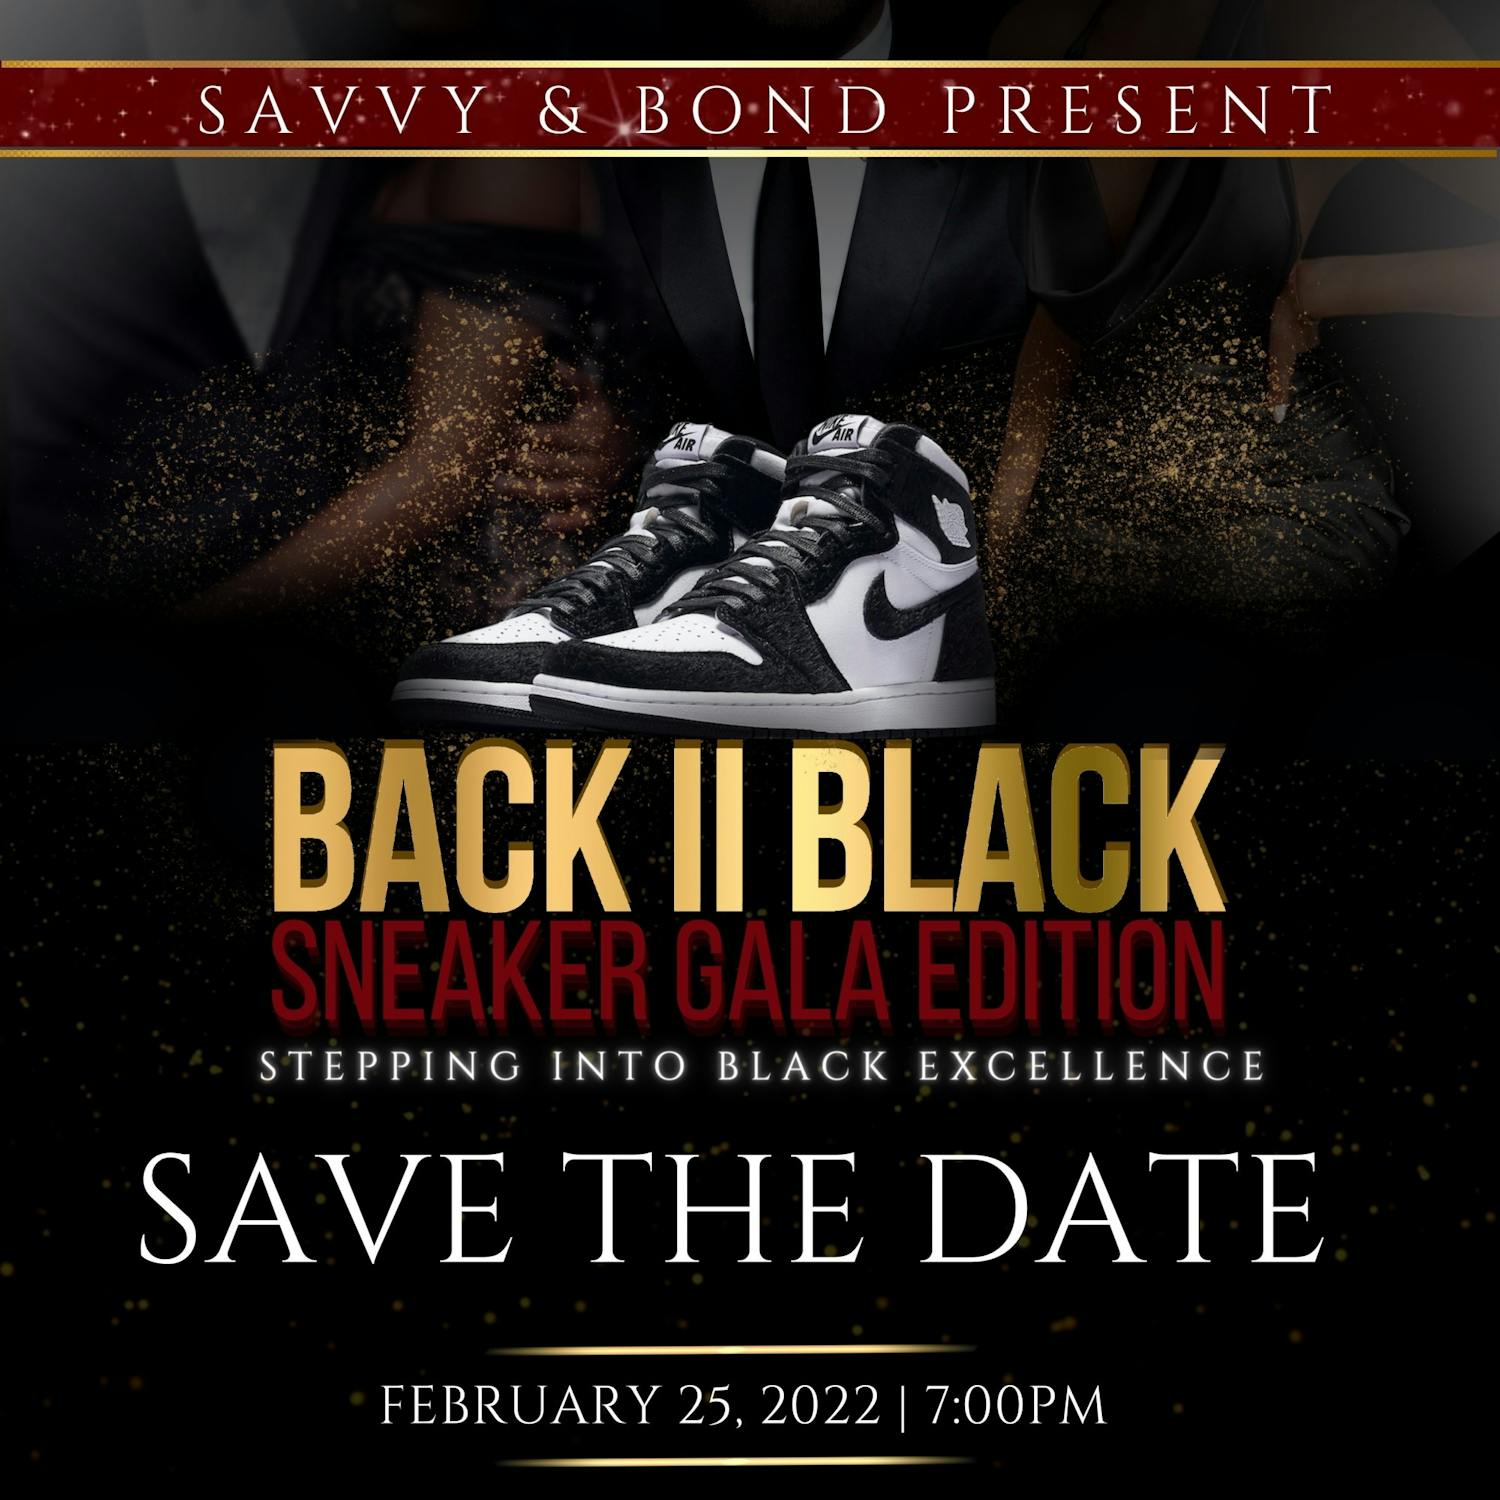 The Black II Black Gala returns Feb. 25, 2022. Presented by BOND and SAVVY, the gala aims to create a community amongst Black students at 鶹С򽴫ý and join in a celebration around Black excellence.